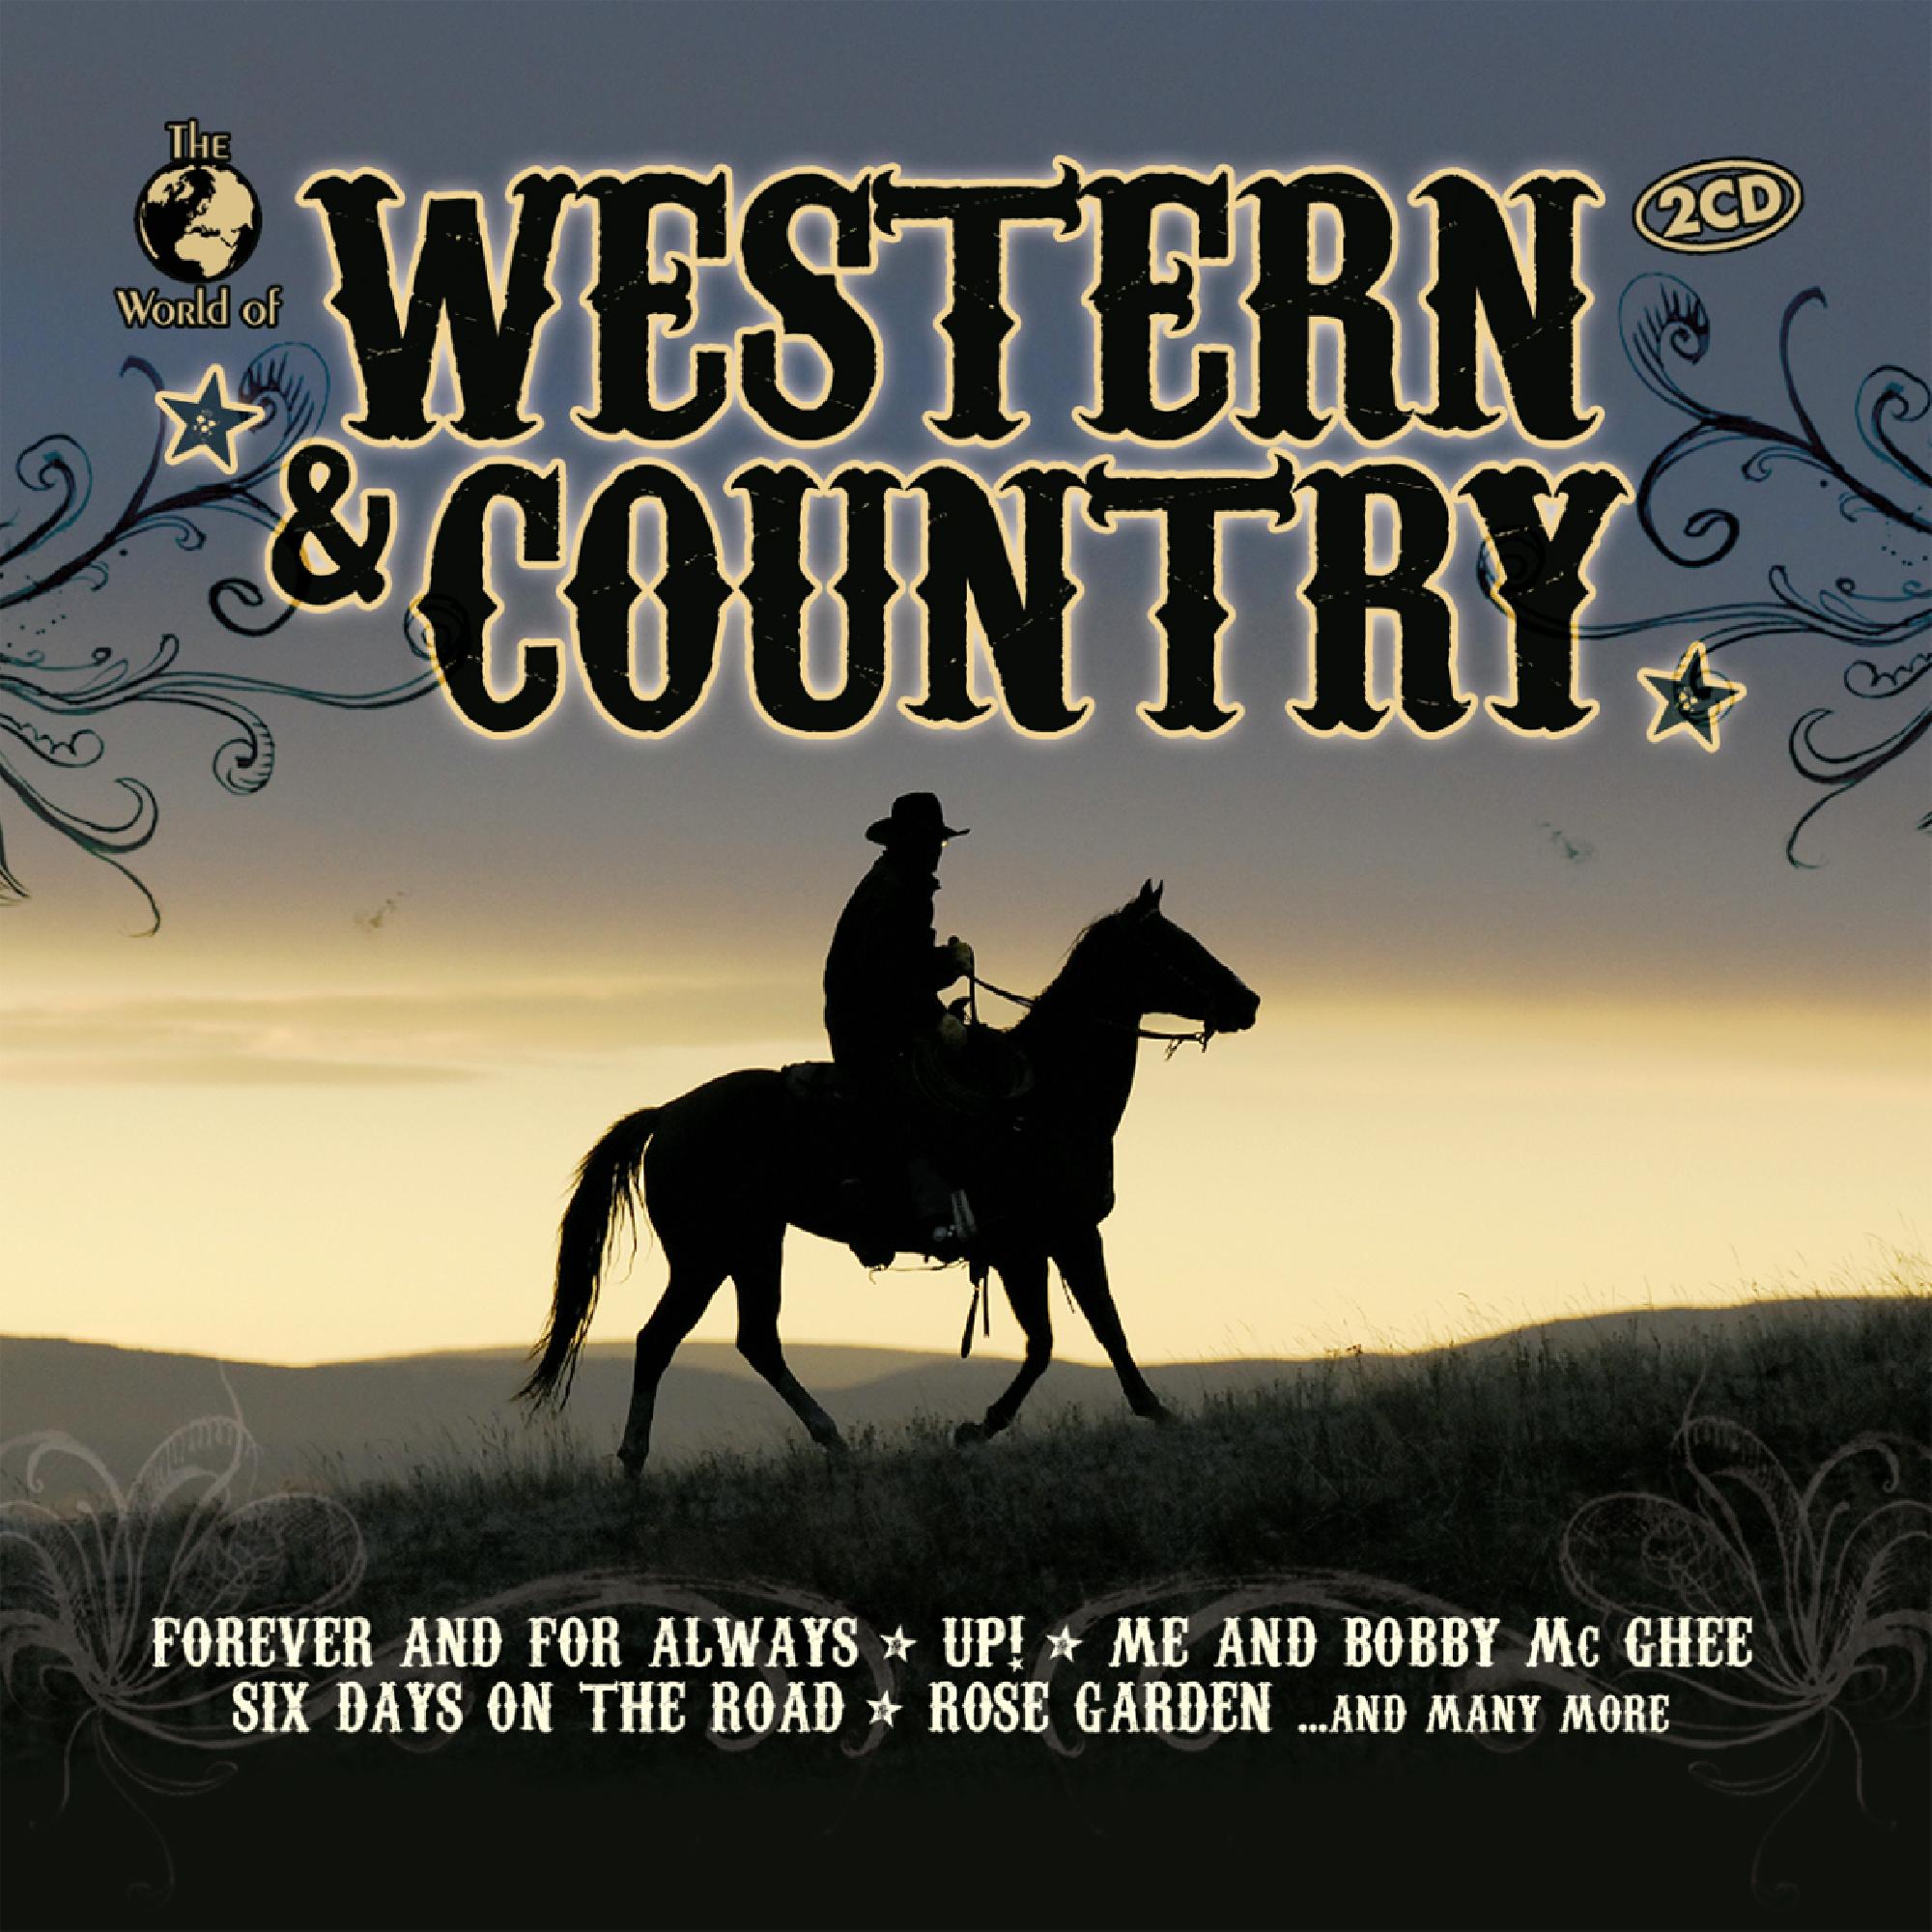 Country and western. Кантри музыка картинки. Country and Western Music. Кантри рок. Western Countries.